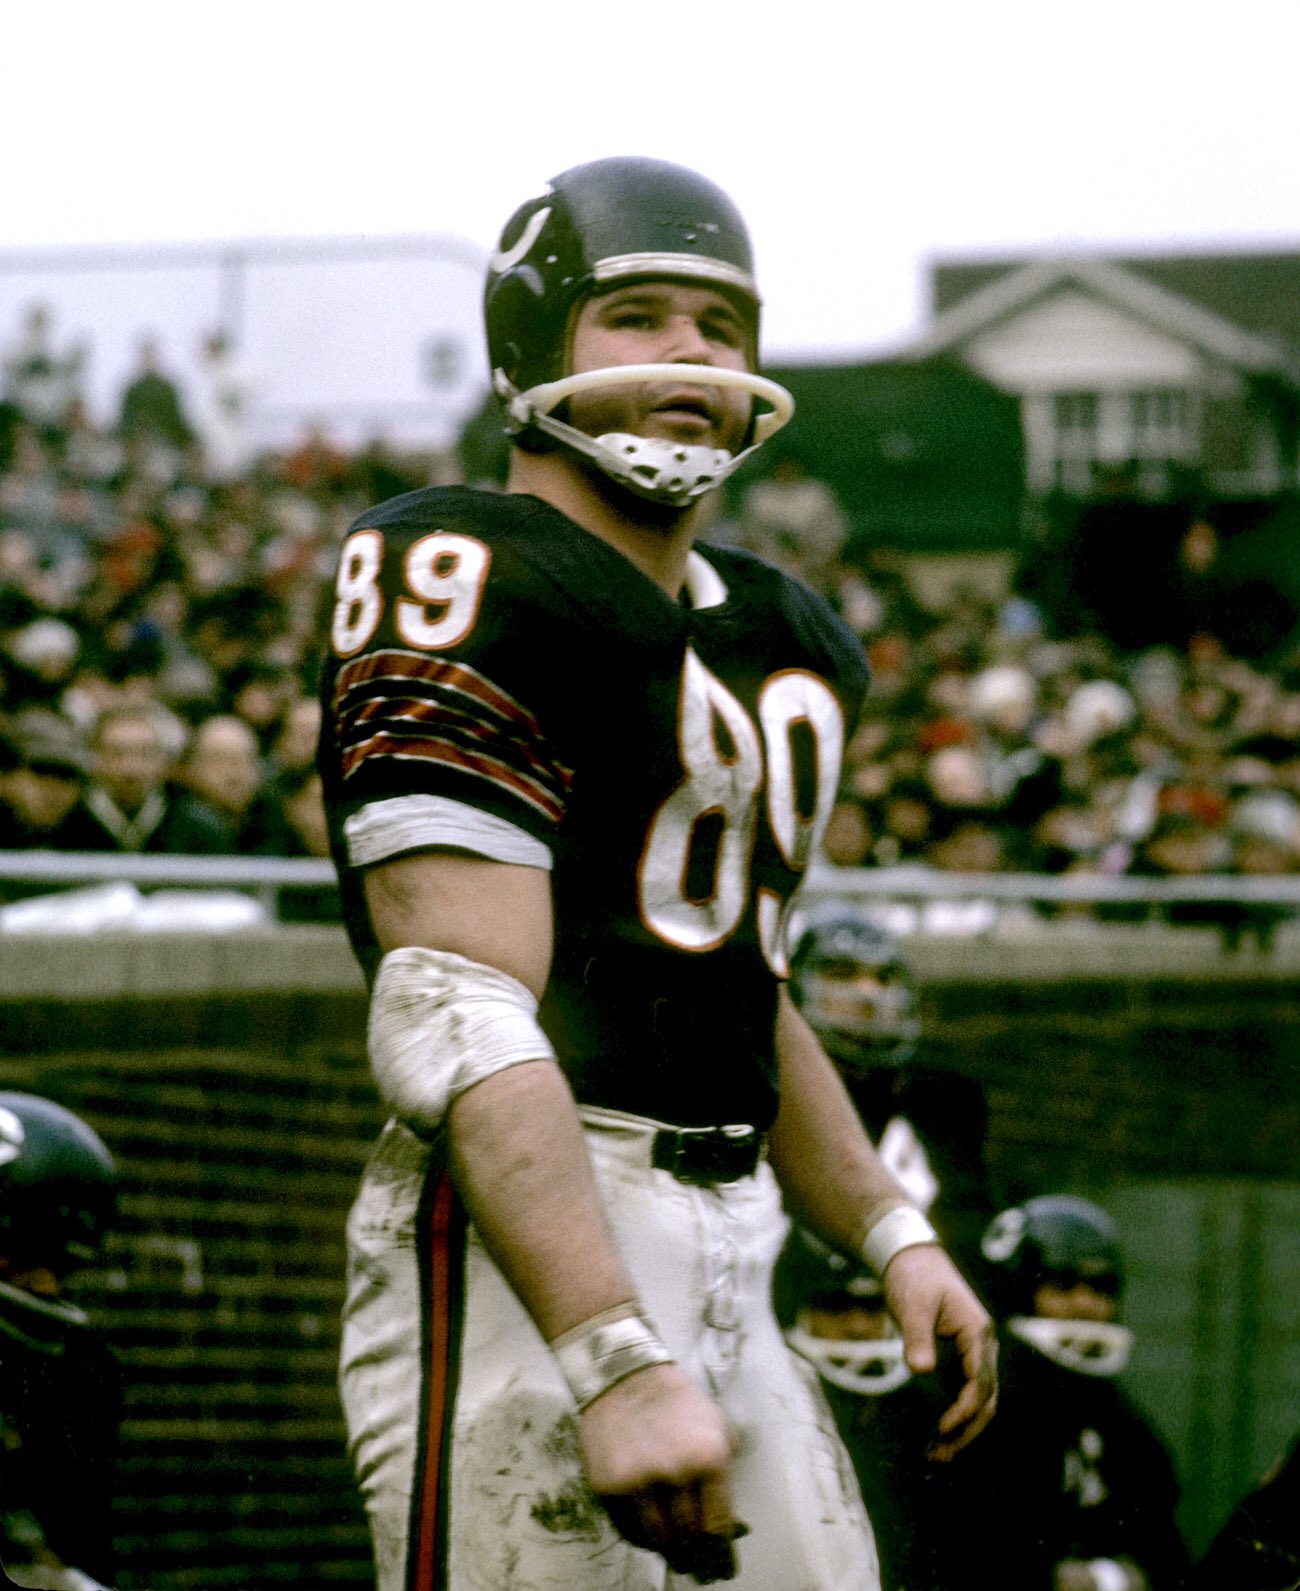 Happy birthday to one of the greatest personality to ever grace the game, Mike Ditka! 